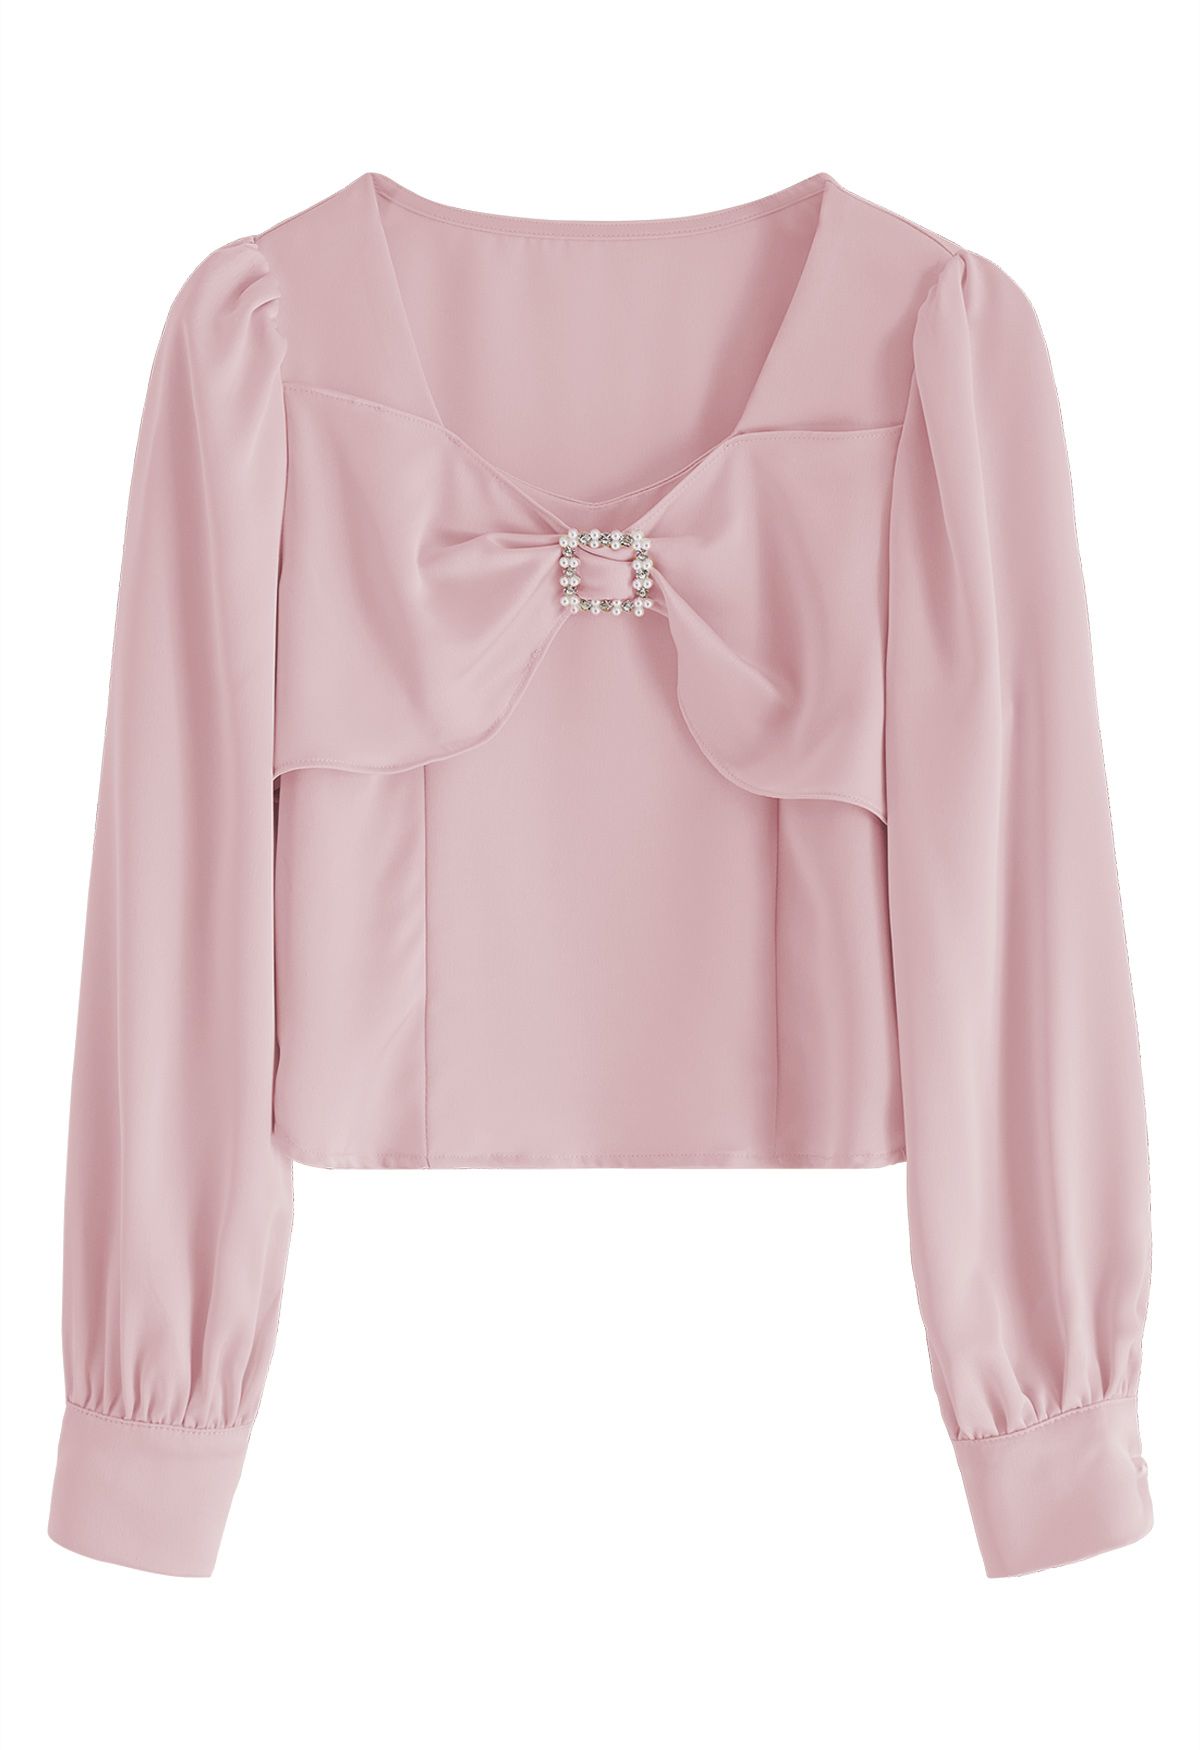 Sweetheart Neck Diamante Bowknot Satin Top in Pink